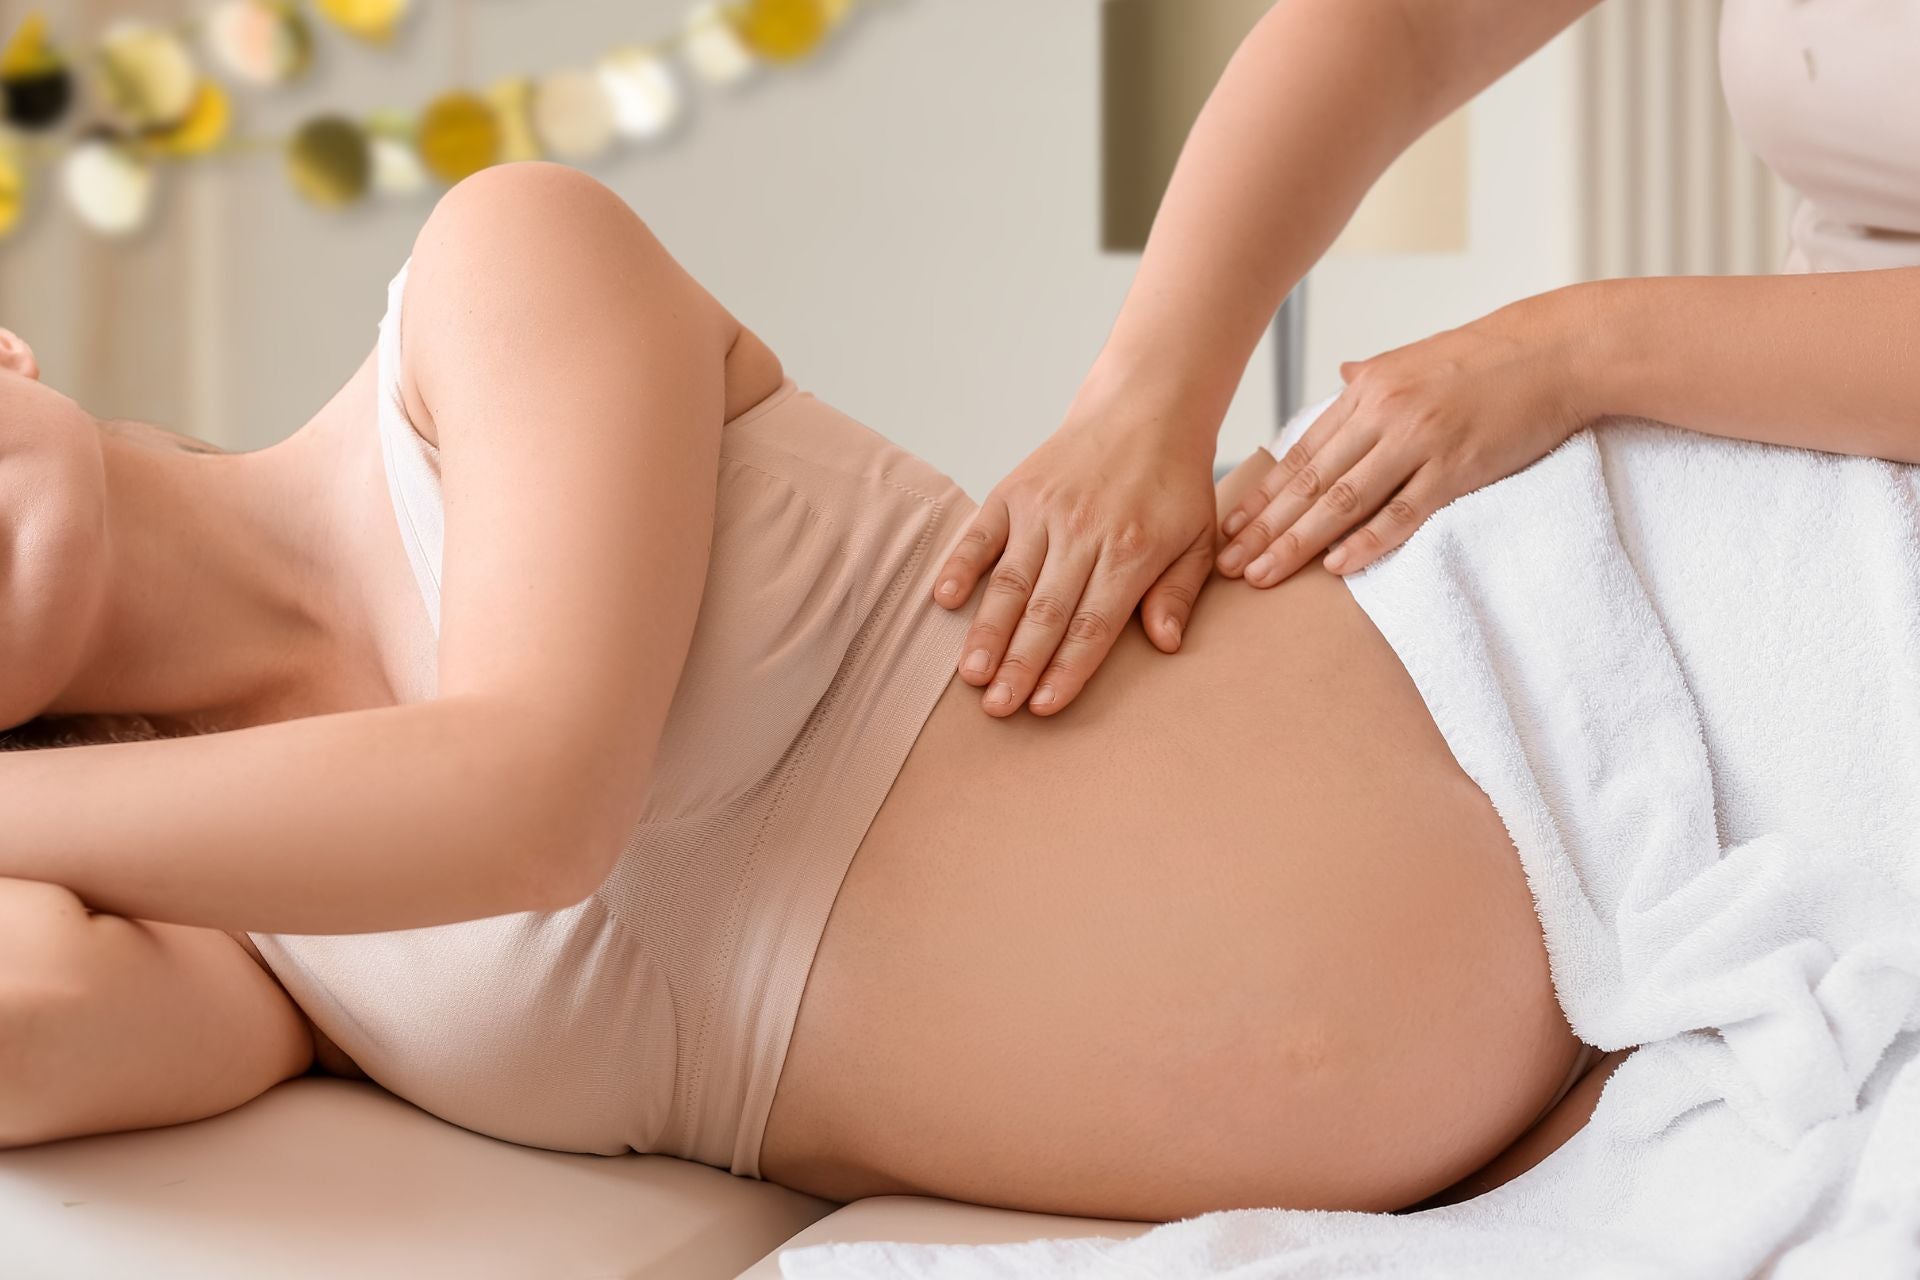 An image of a pregnant woman lying in bed with someone helping her manage pregnancy pain and swelling.